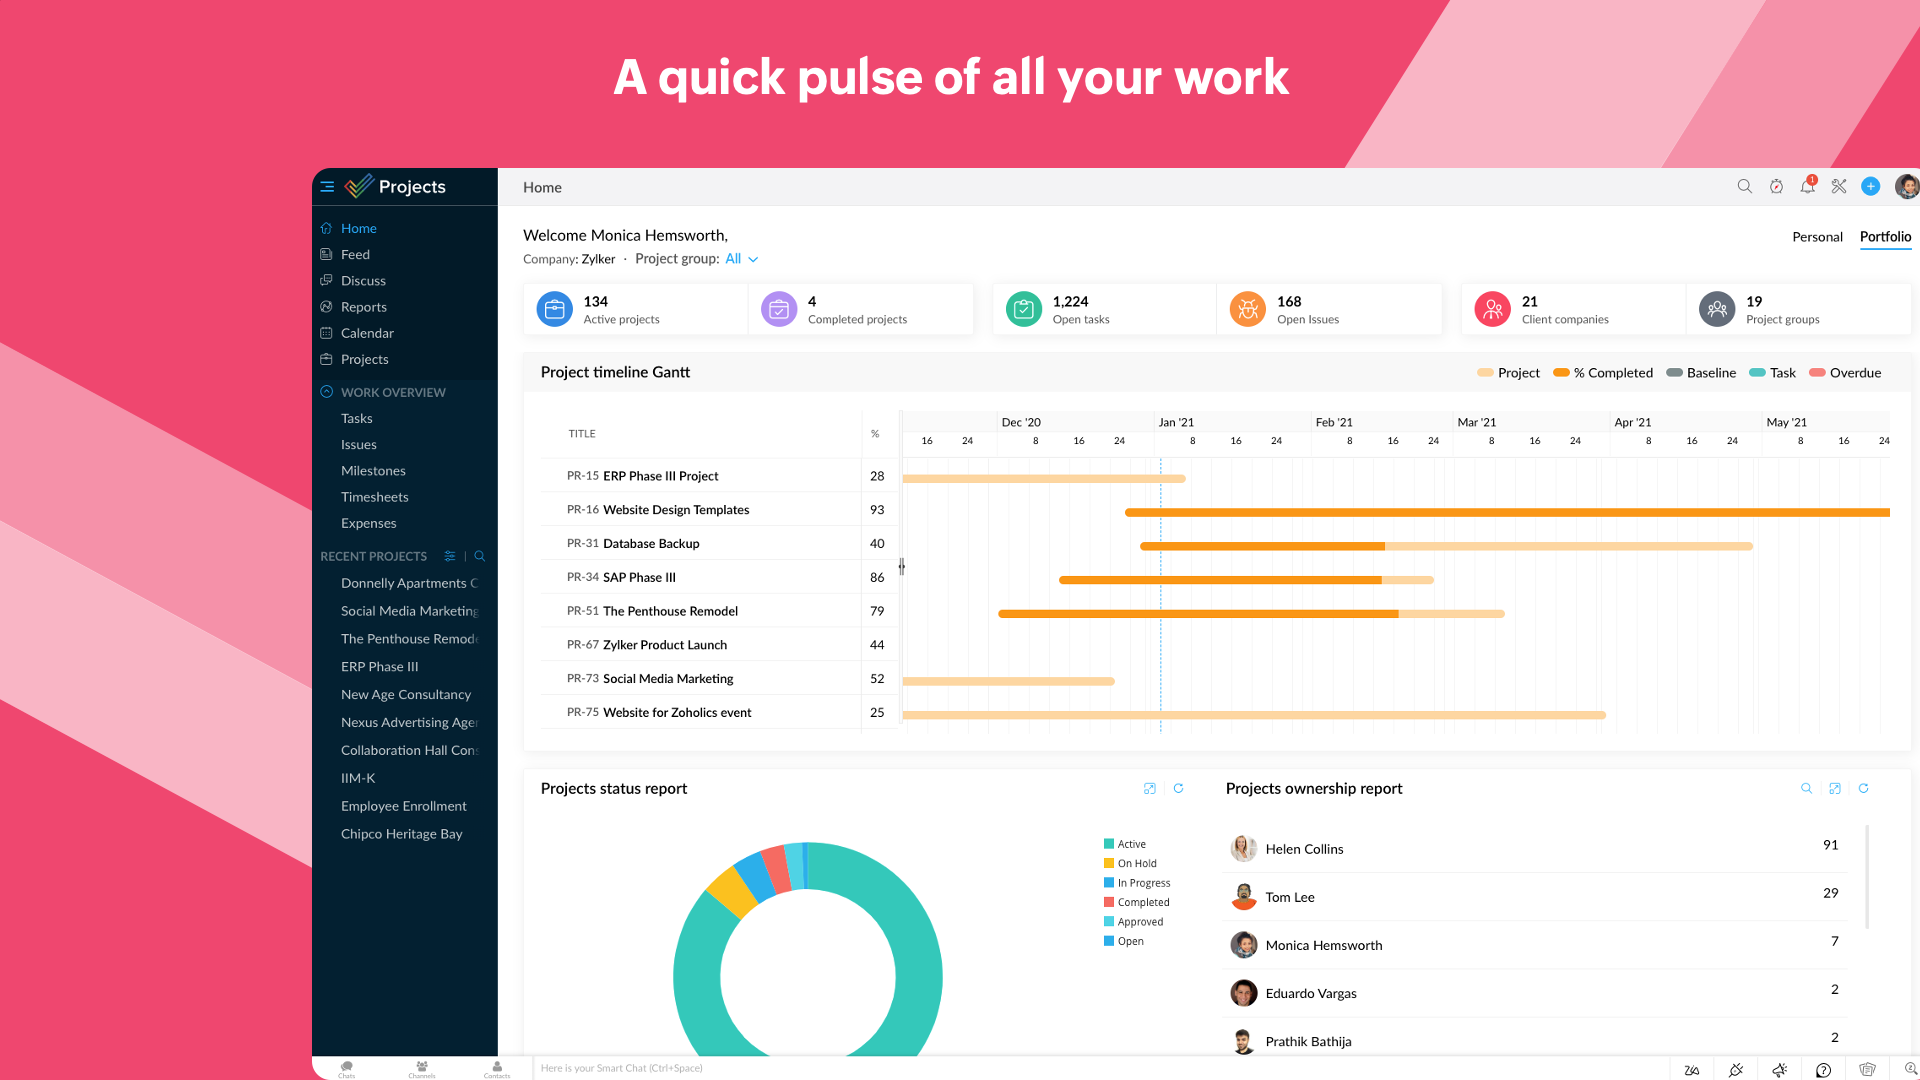 Zoho Projects Software - A quick pulse of all your work - The Portfolio dashboard, is a compact overview of all the work that's been happening across projects with widgets that address the project level timeline, status, ownership, budget health, and clients.